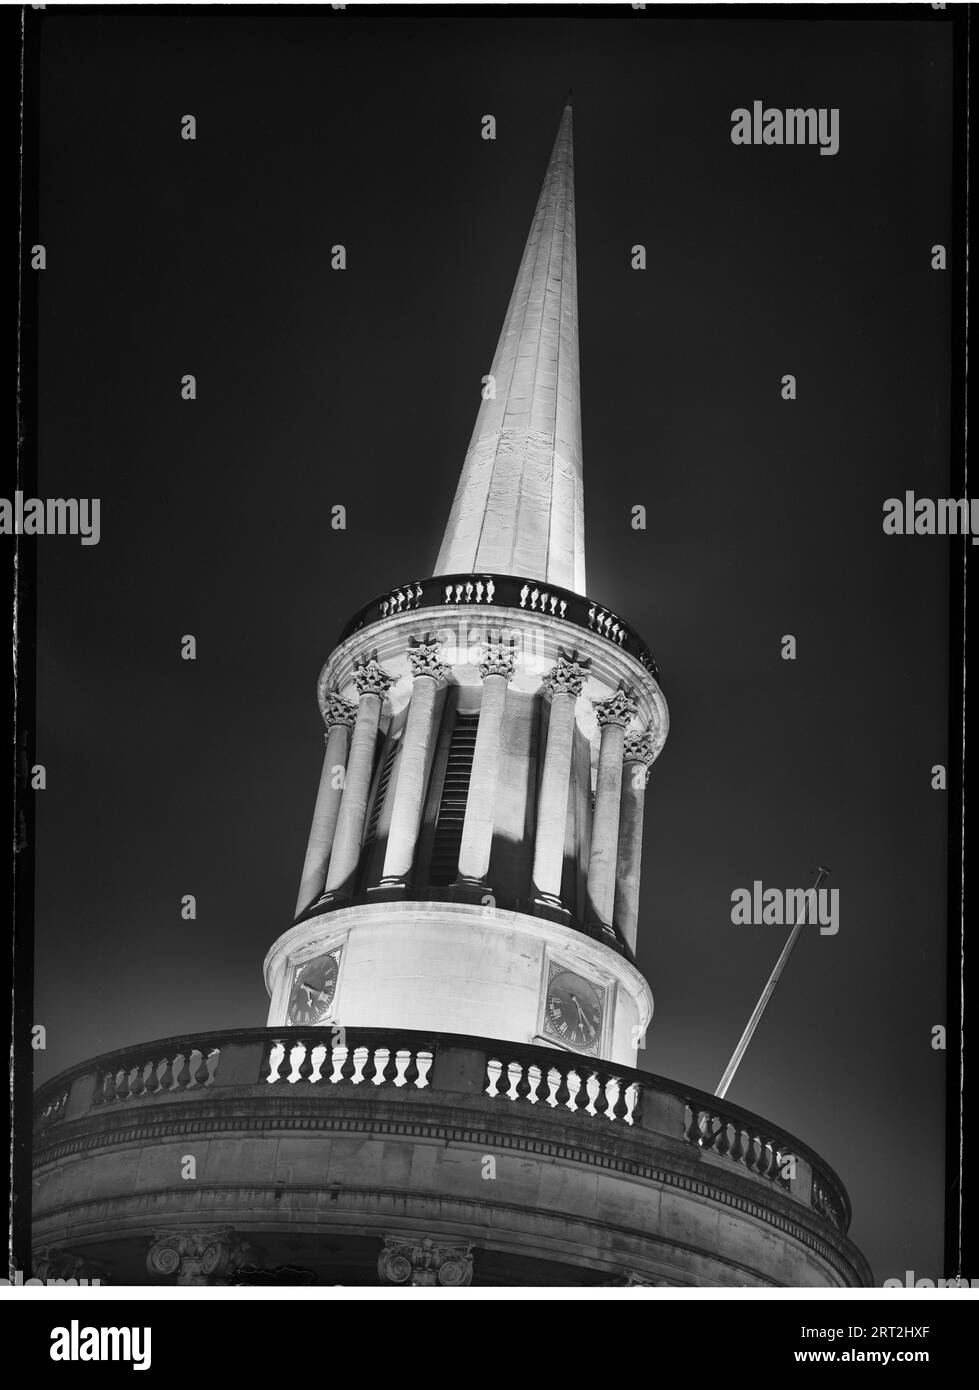 All Souls Church, Langham Place, Marylebone, City of Westminster, Greater London Authority, 1950. Looking up towards the church's restored spire, floodlit at night, from the south-east. Stock Photo